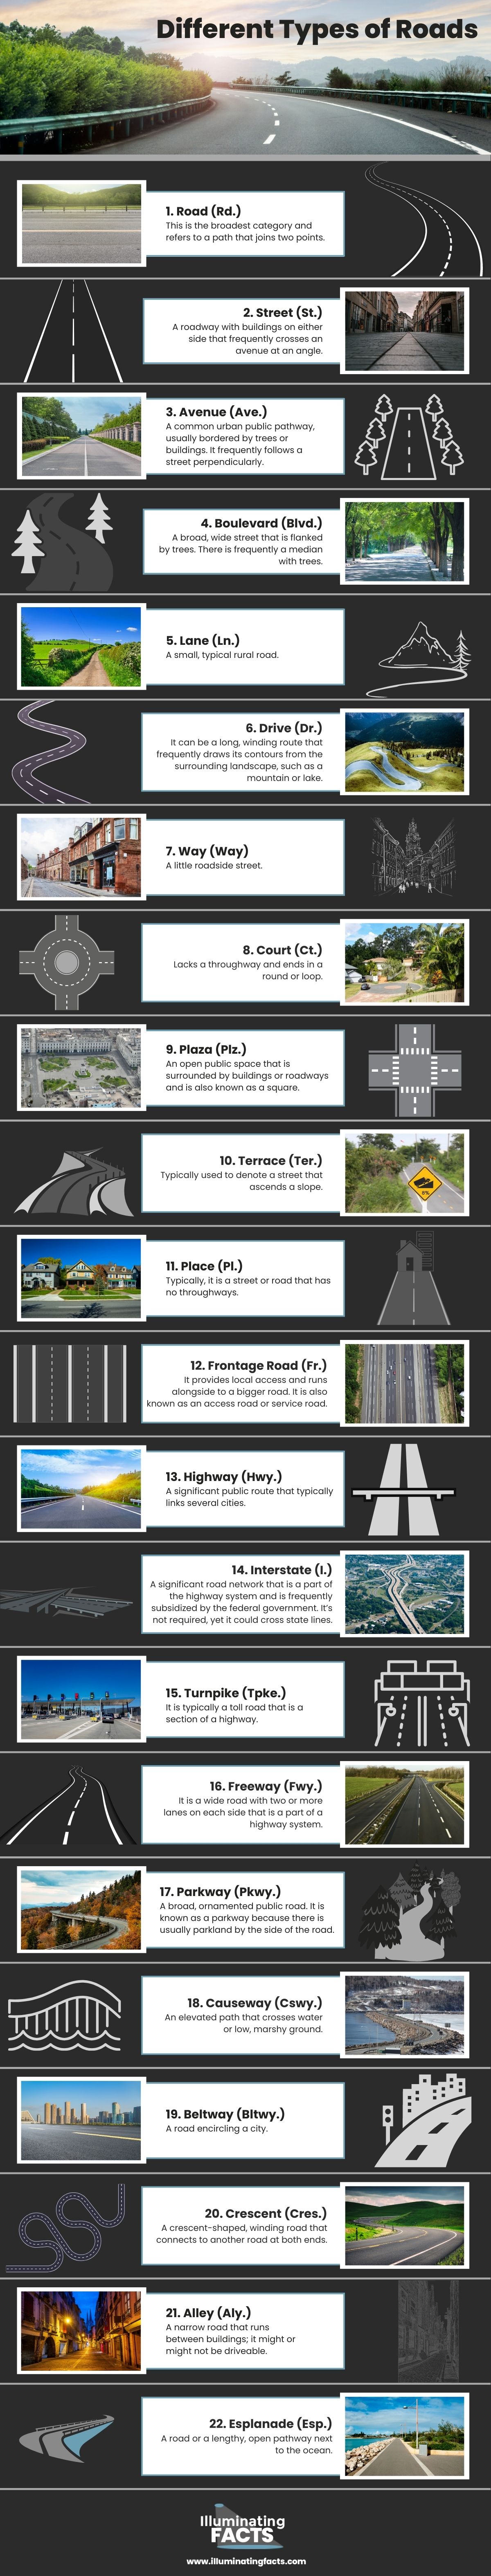 Different Types of Roads